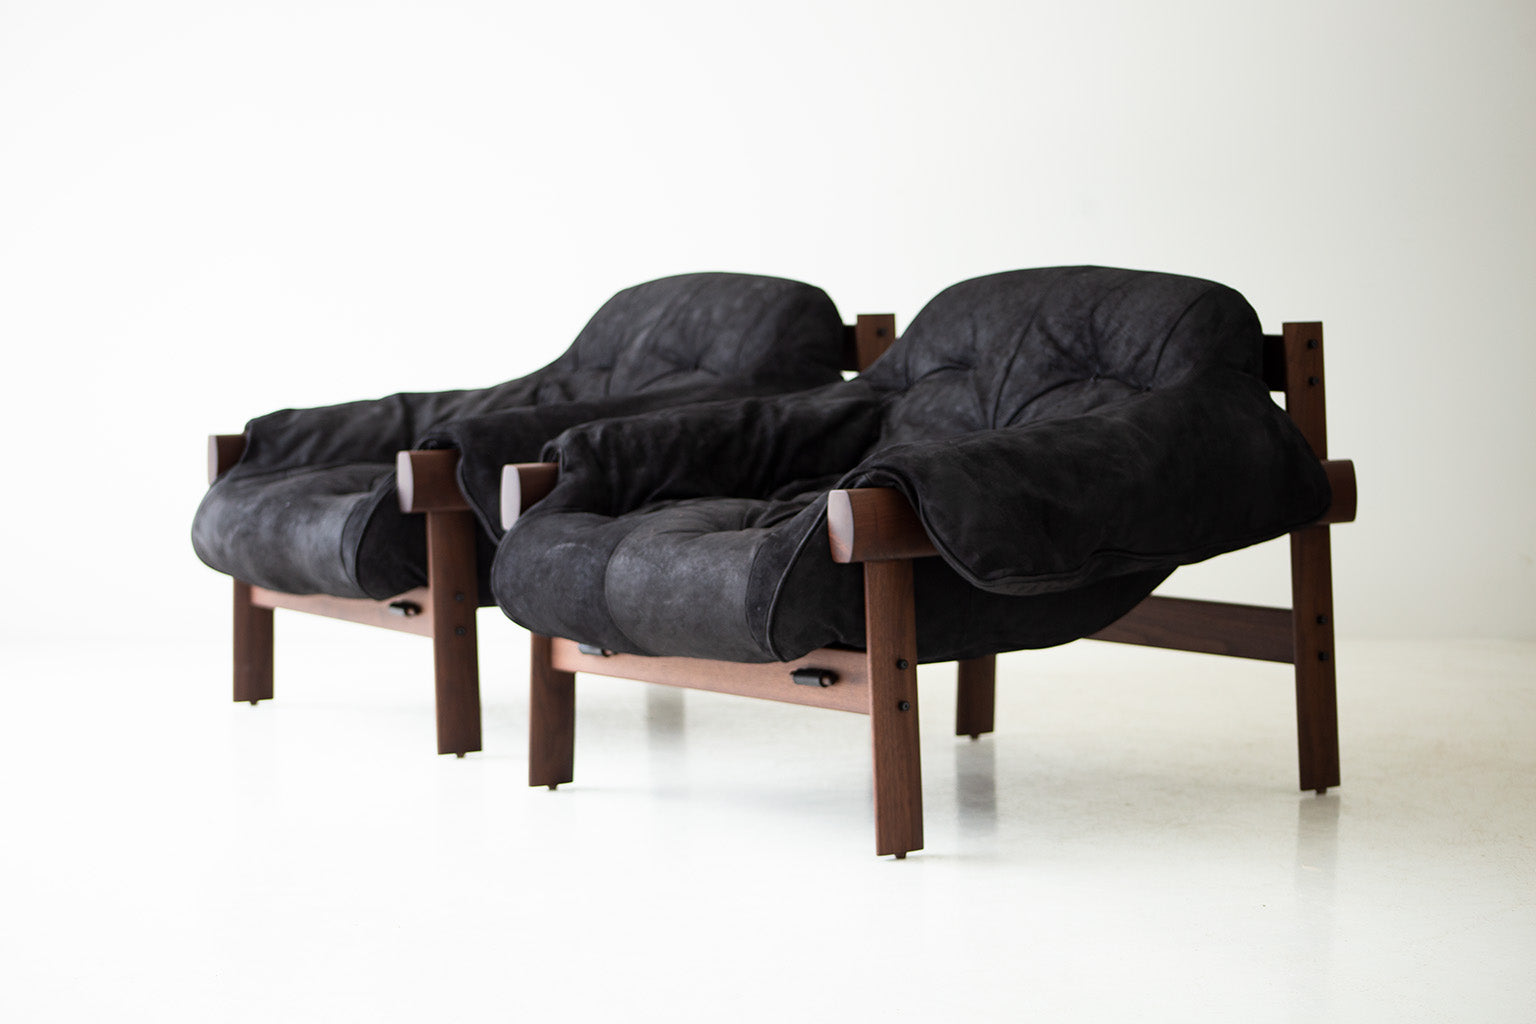      percival-modern-black-leather-lounge-chairs-mp-41-06